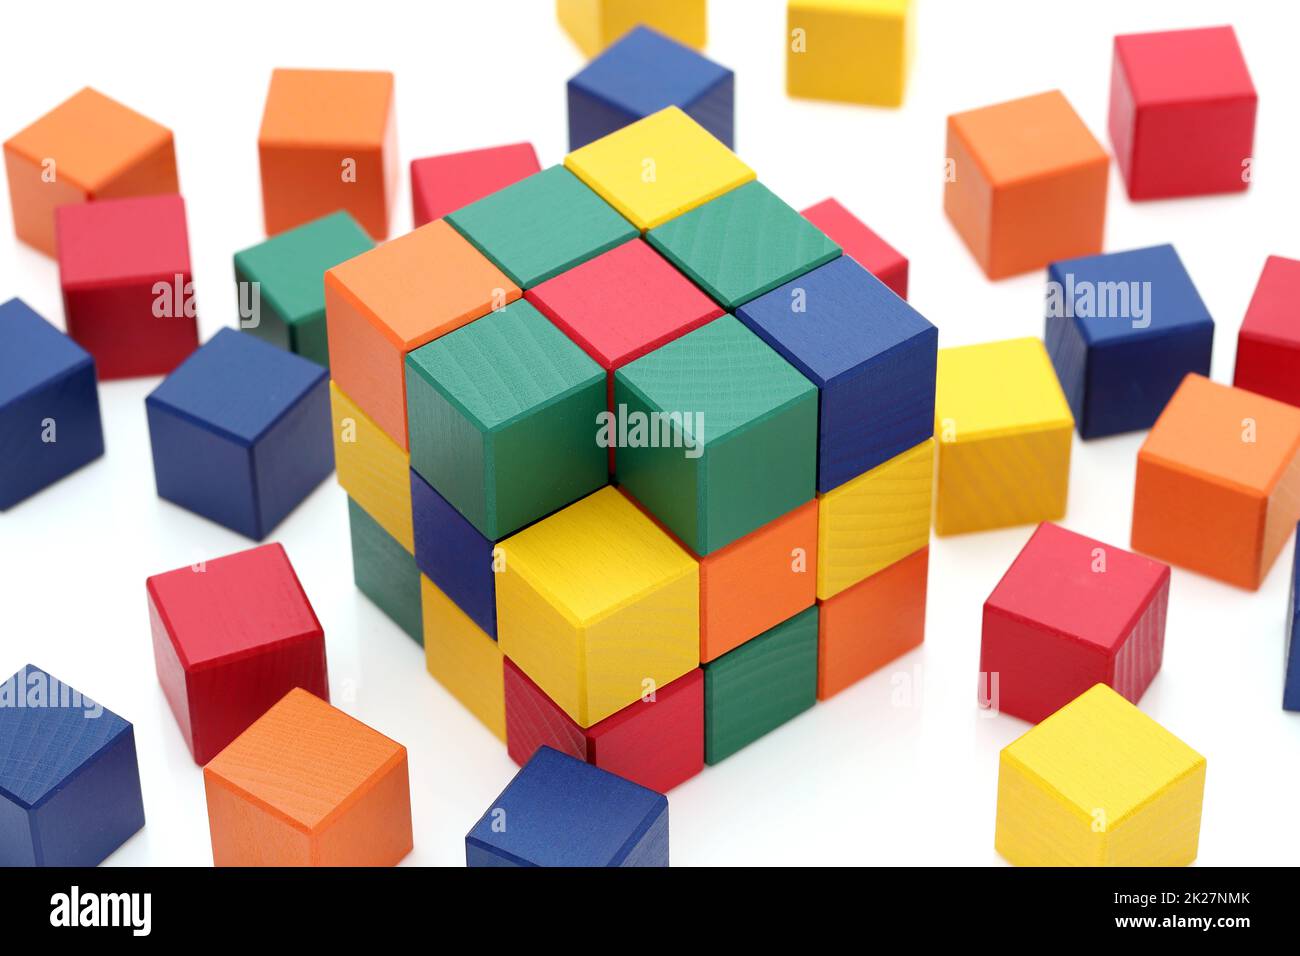 small wooden colorful square blocks puzzle on a white background Stock Photo